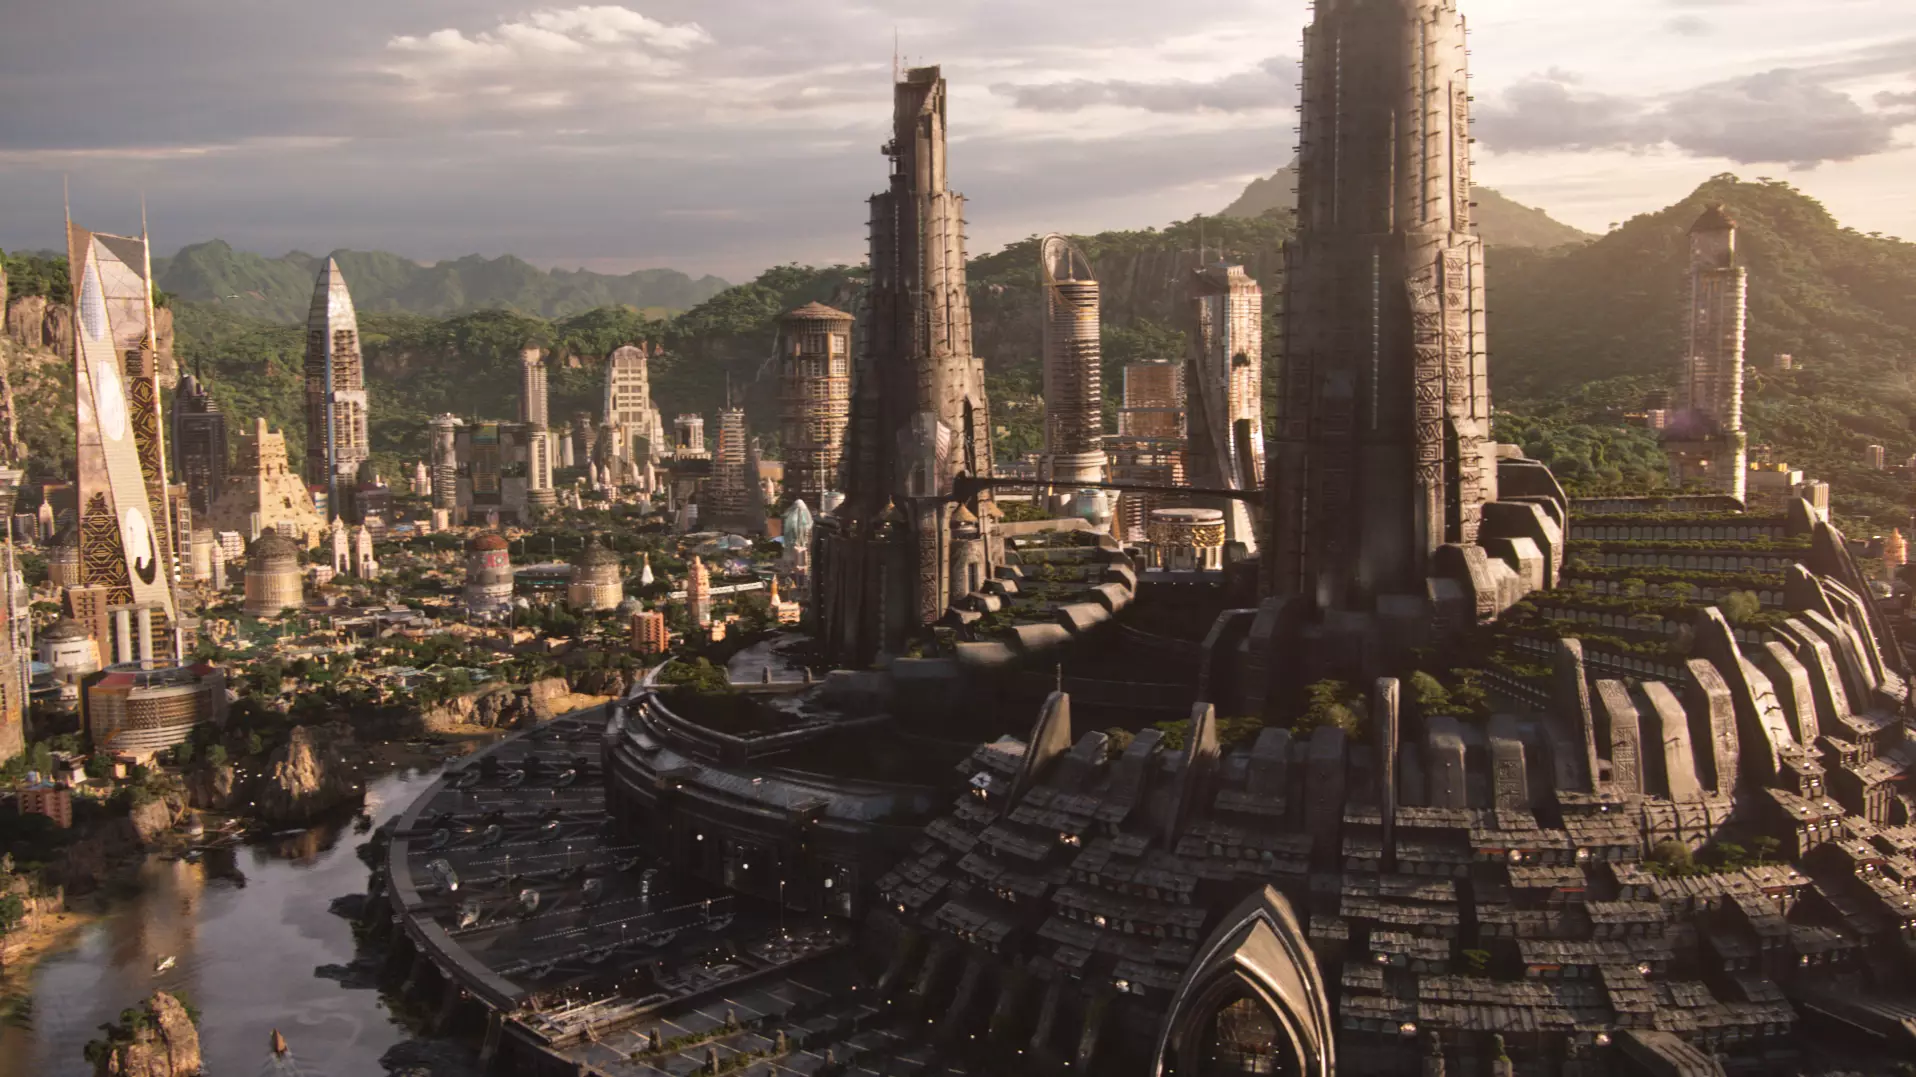 TV Show Set In Black Panther's Wakanda Coming To Disney+